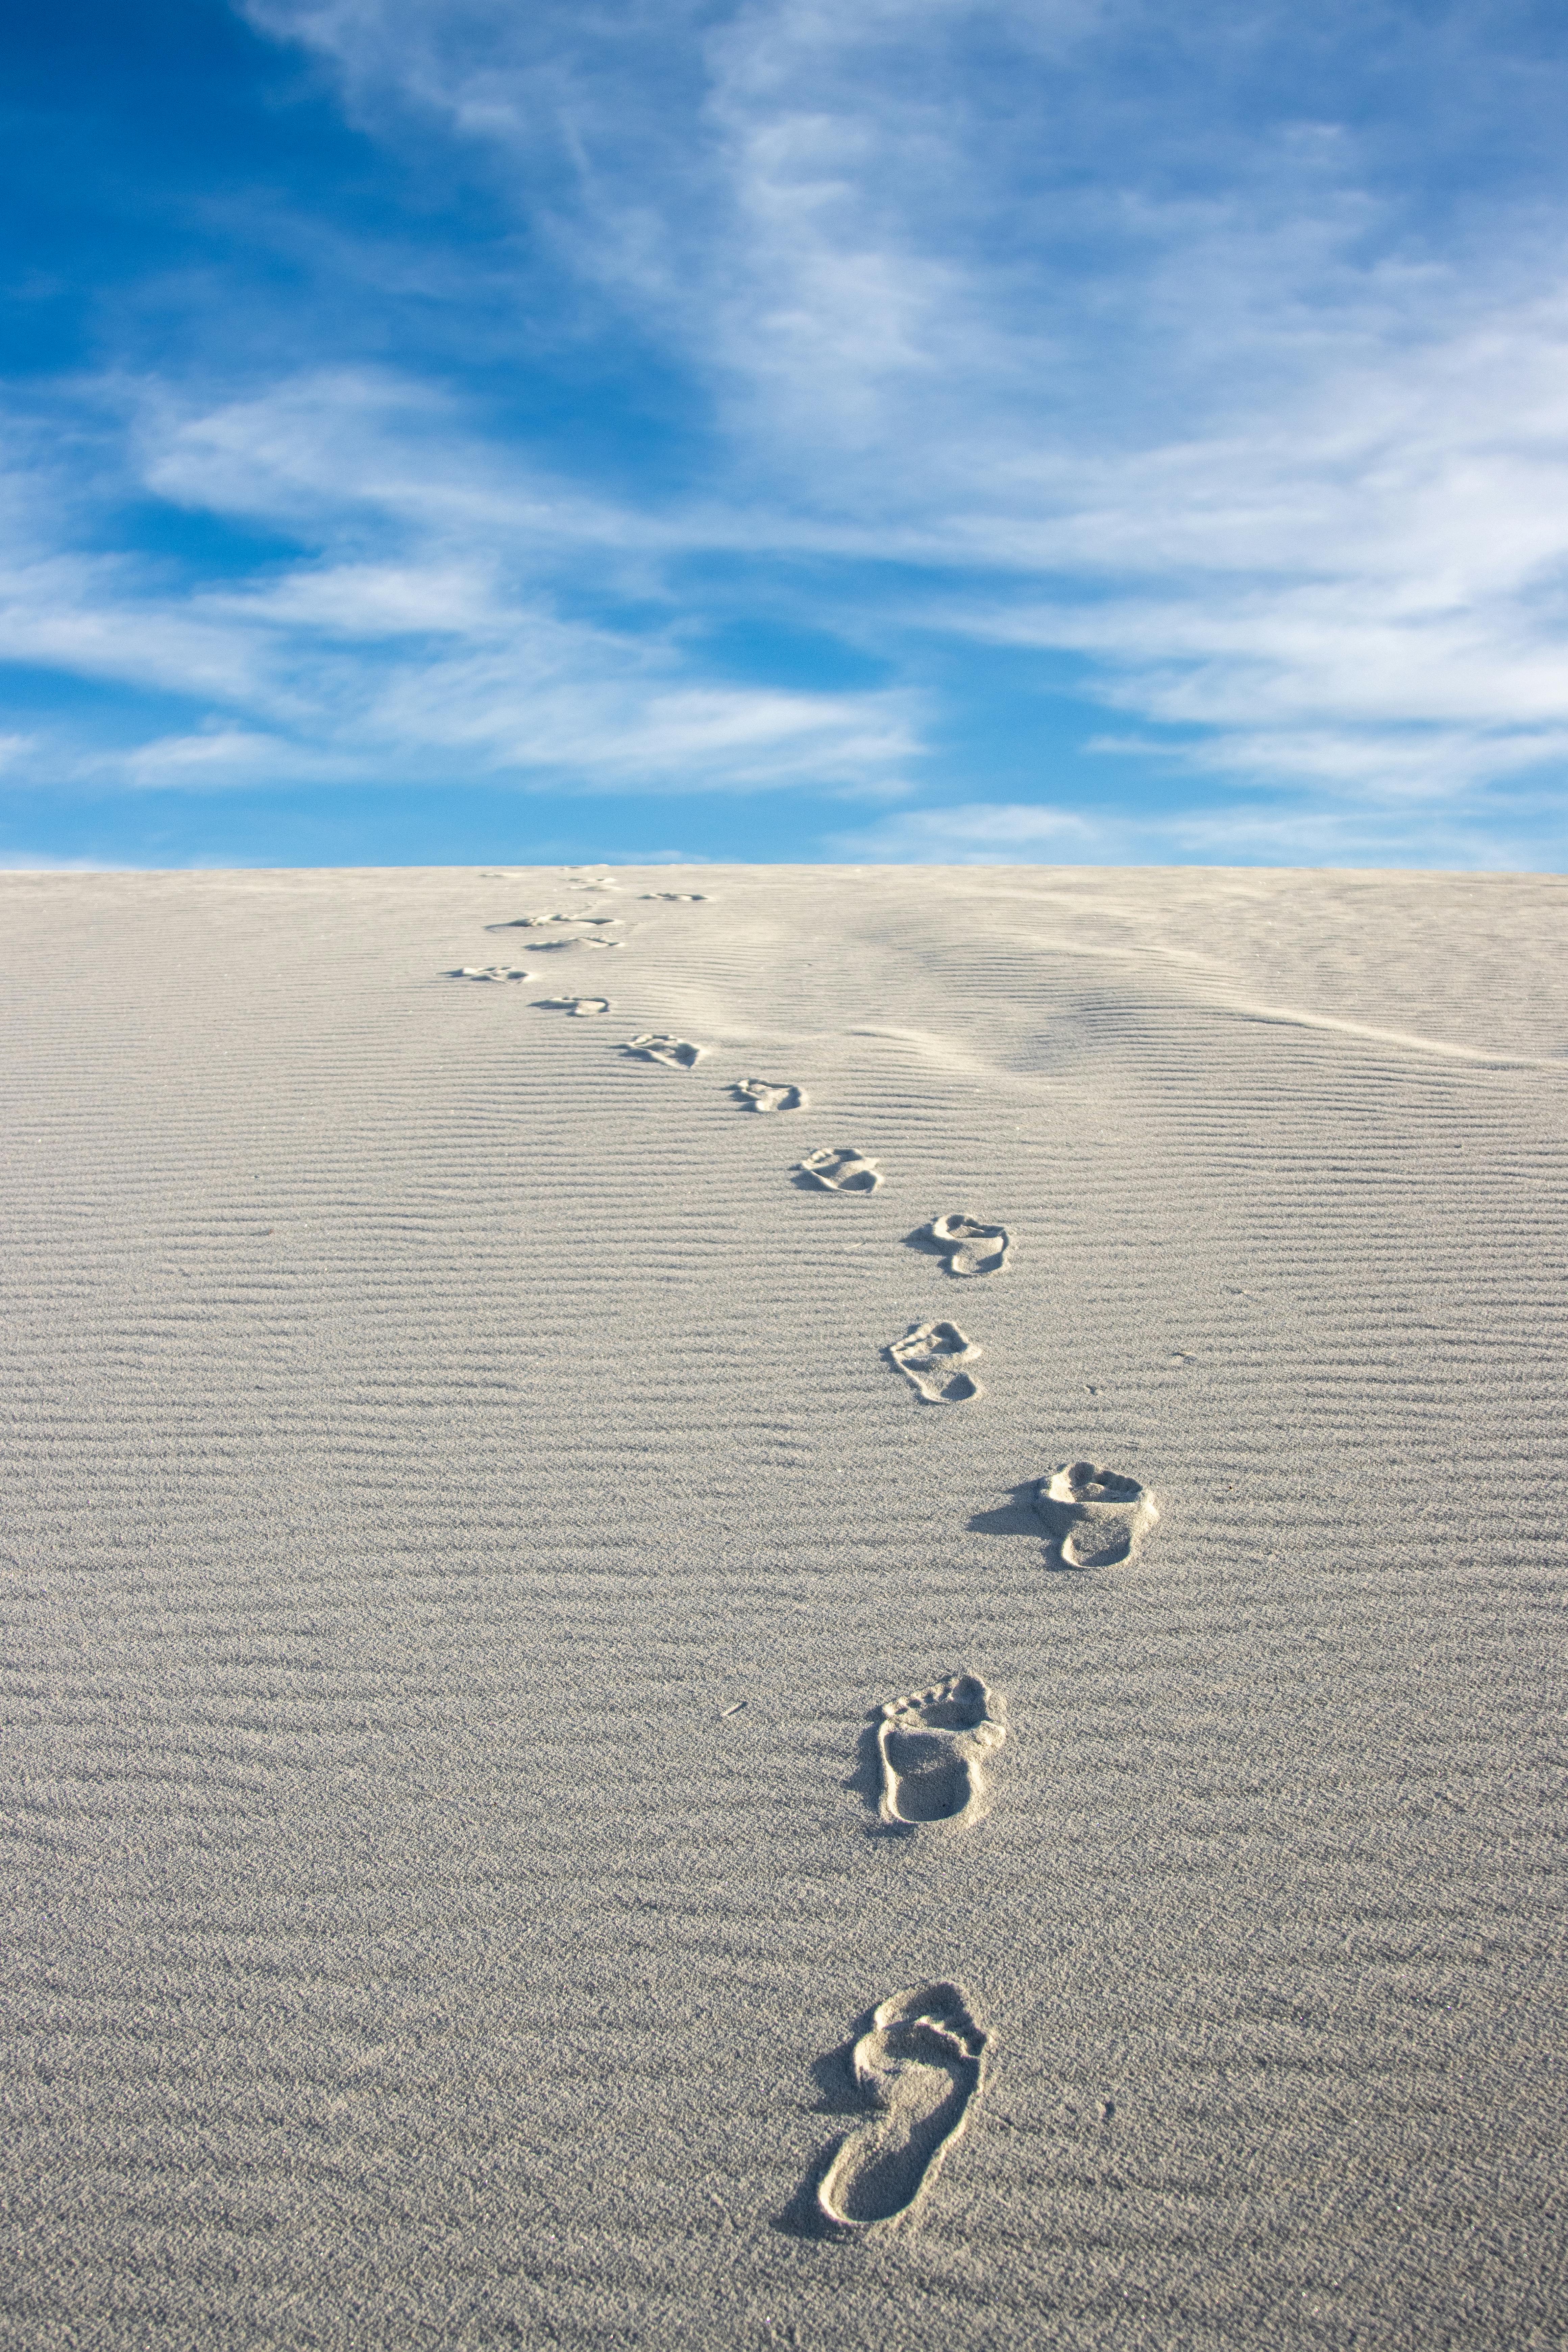 Footsteps On Sand Background Footstep Foot Photo And Picture For Free  Download - Pngtree